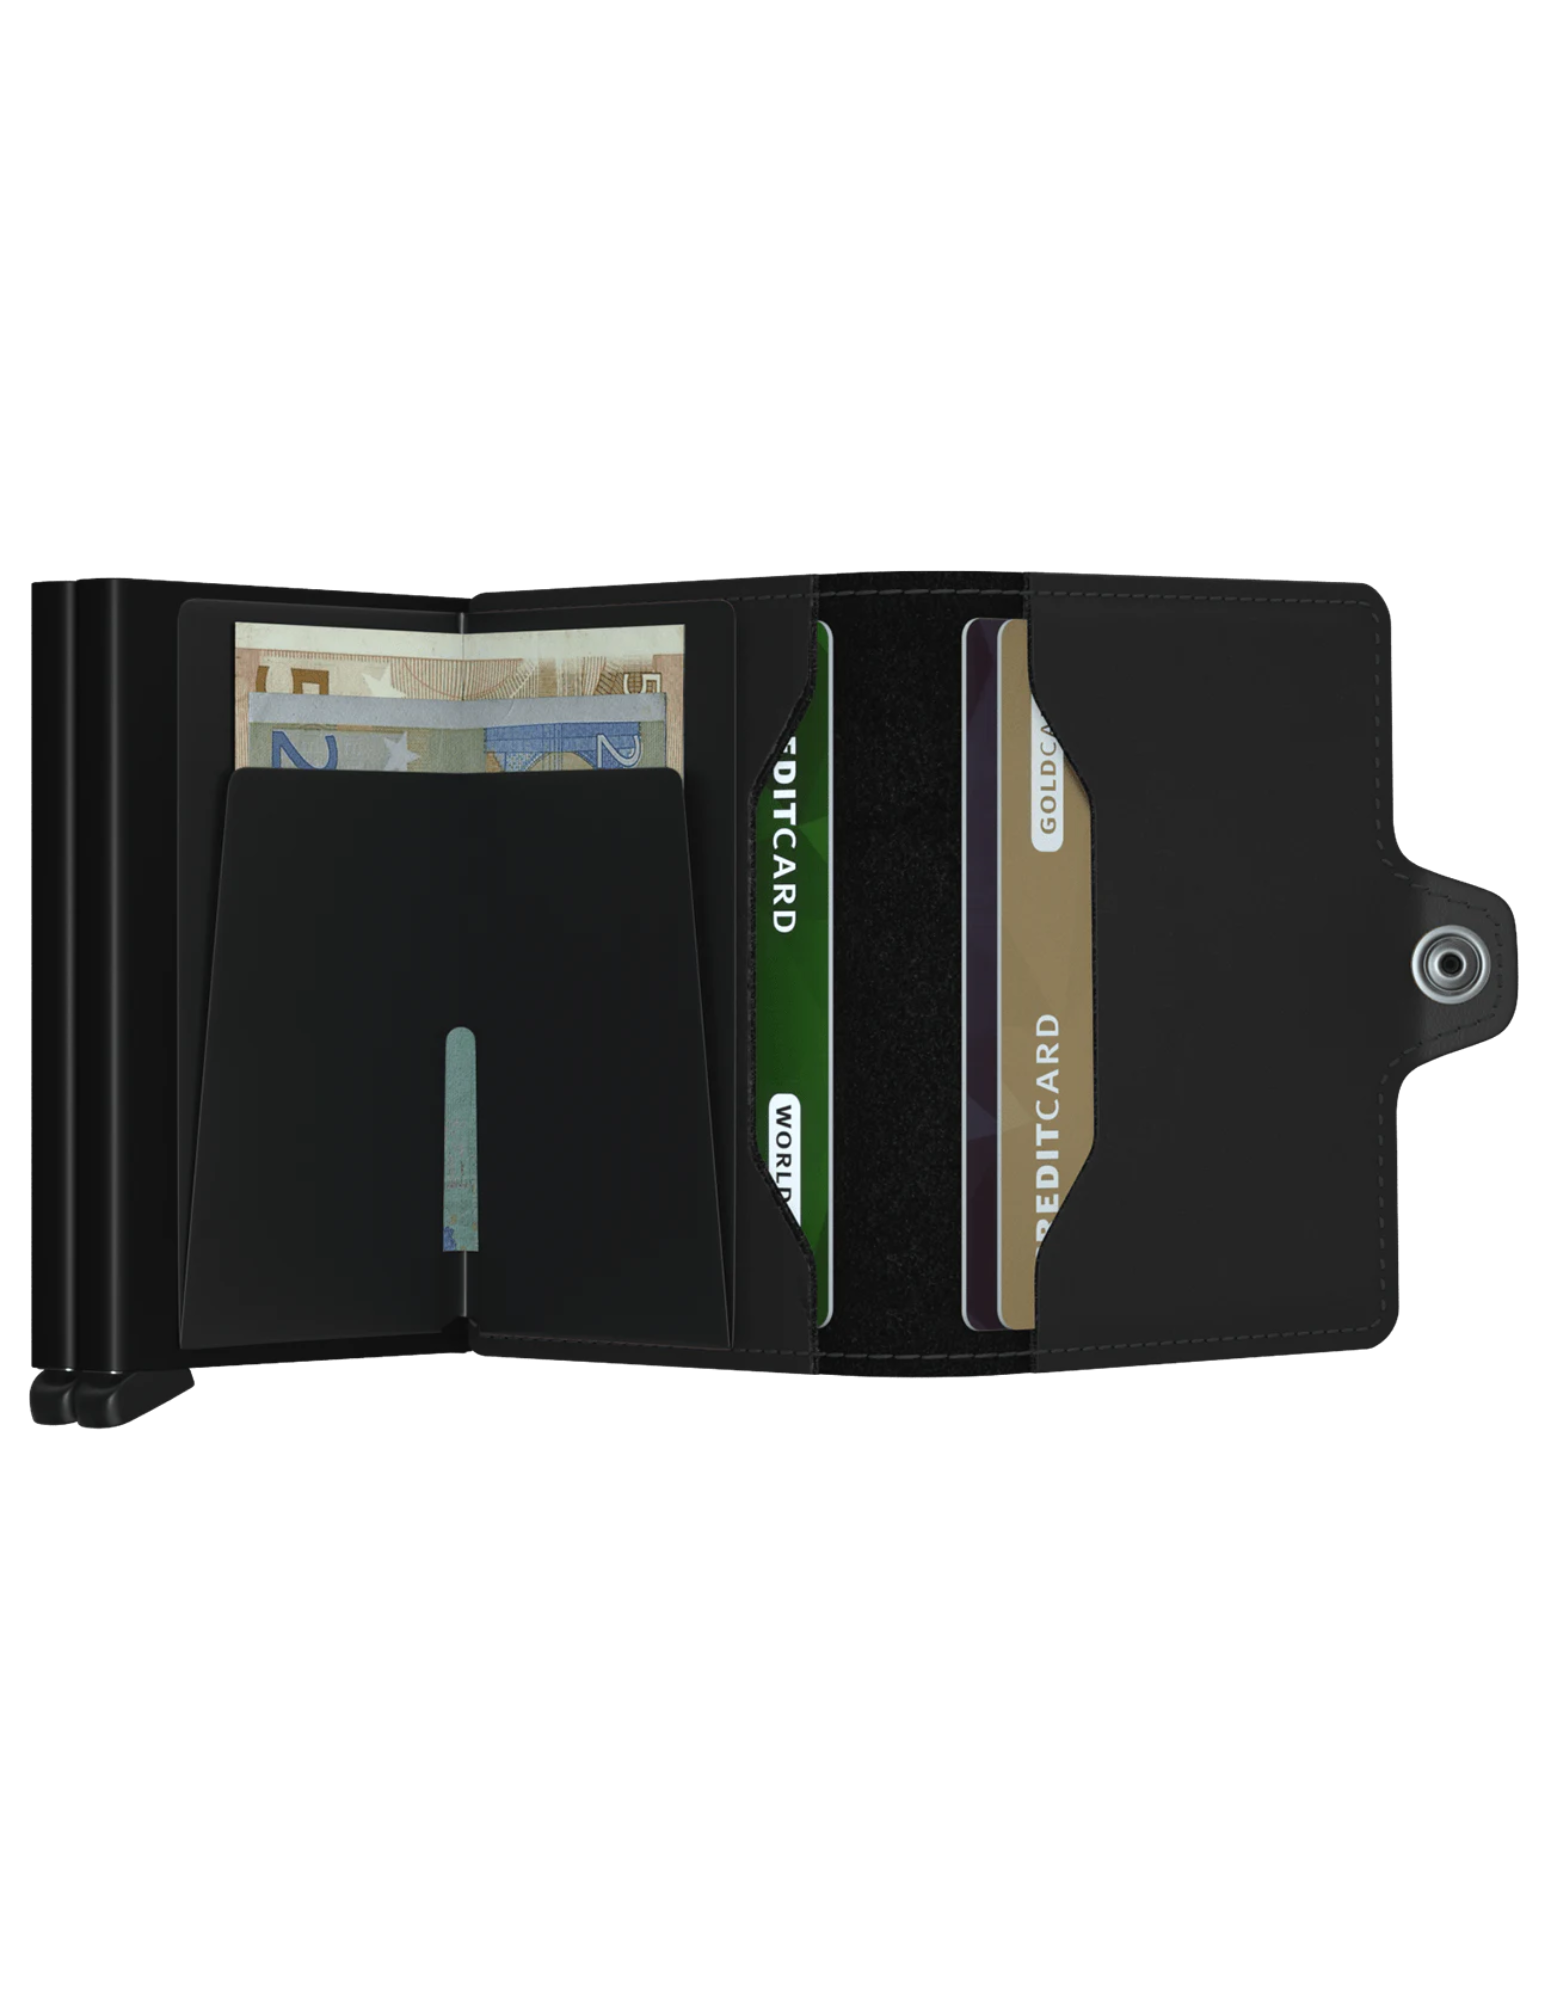 With two Cardprotectors to hold double the content, the Twinwallet carries up to 16 cards, banknotes and receipts, but remains compact in size. Together with its sturdy closure and exterior, to hold extra cards, banknotes and receipts, the Twinwallet holds much but remains compact in size.